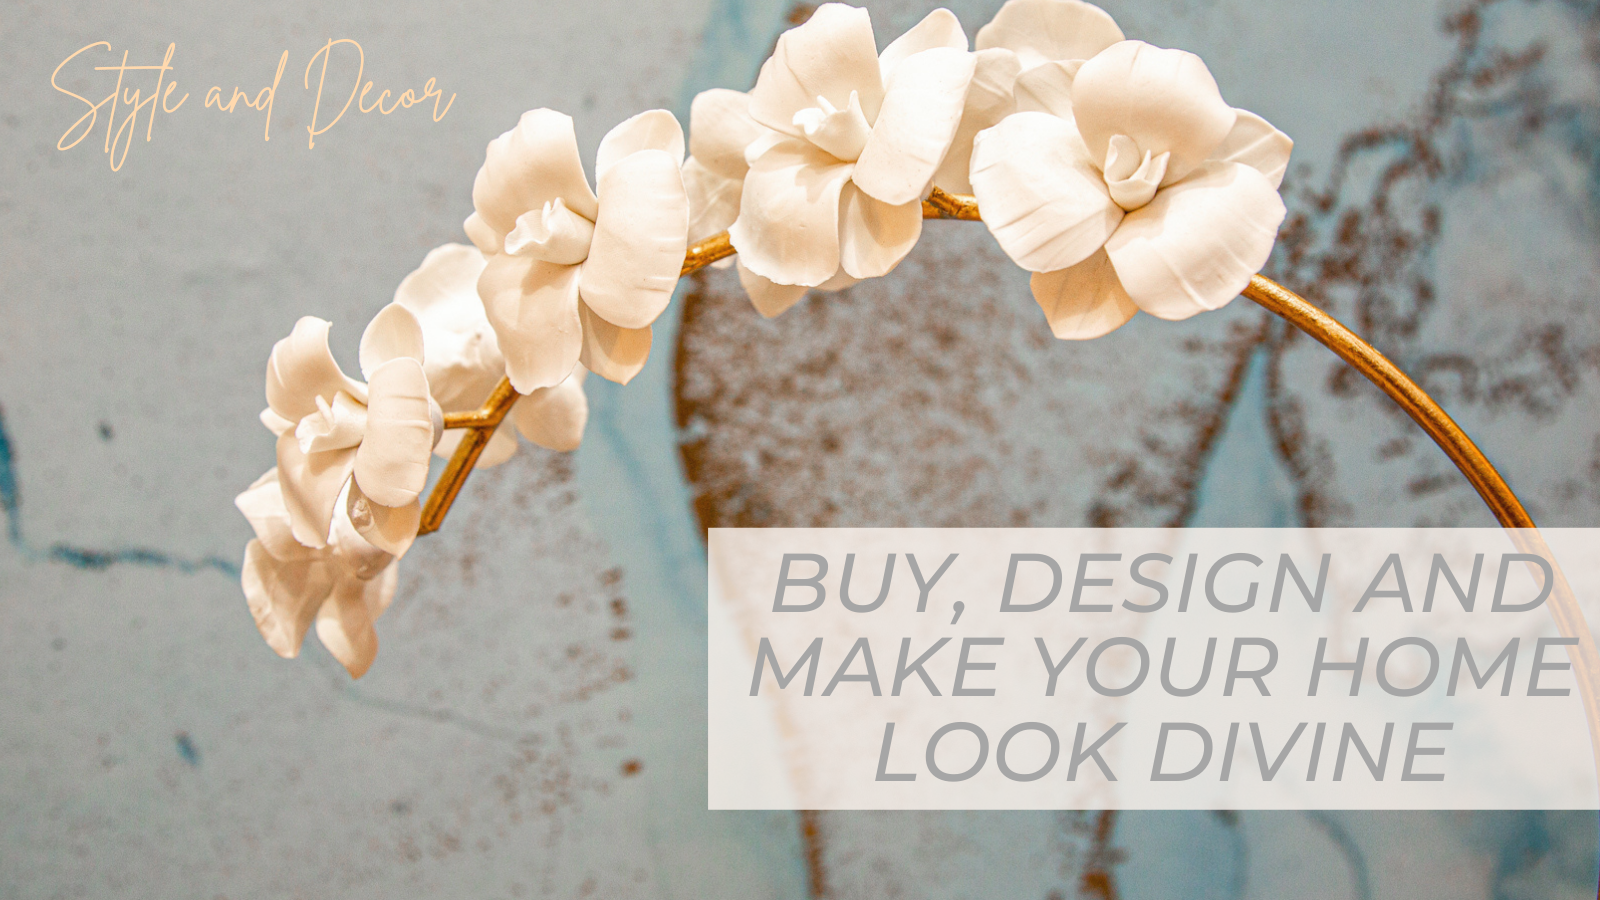 Interior Designers Buy, Design and Make Your Home Look Divine